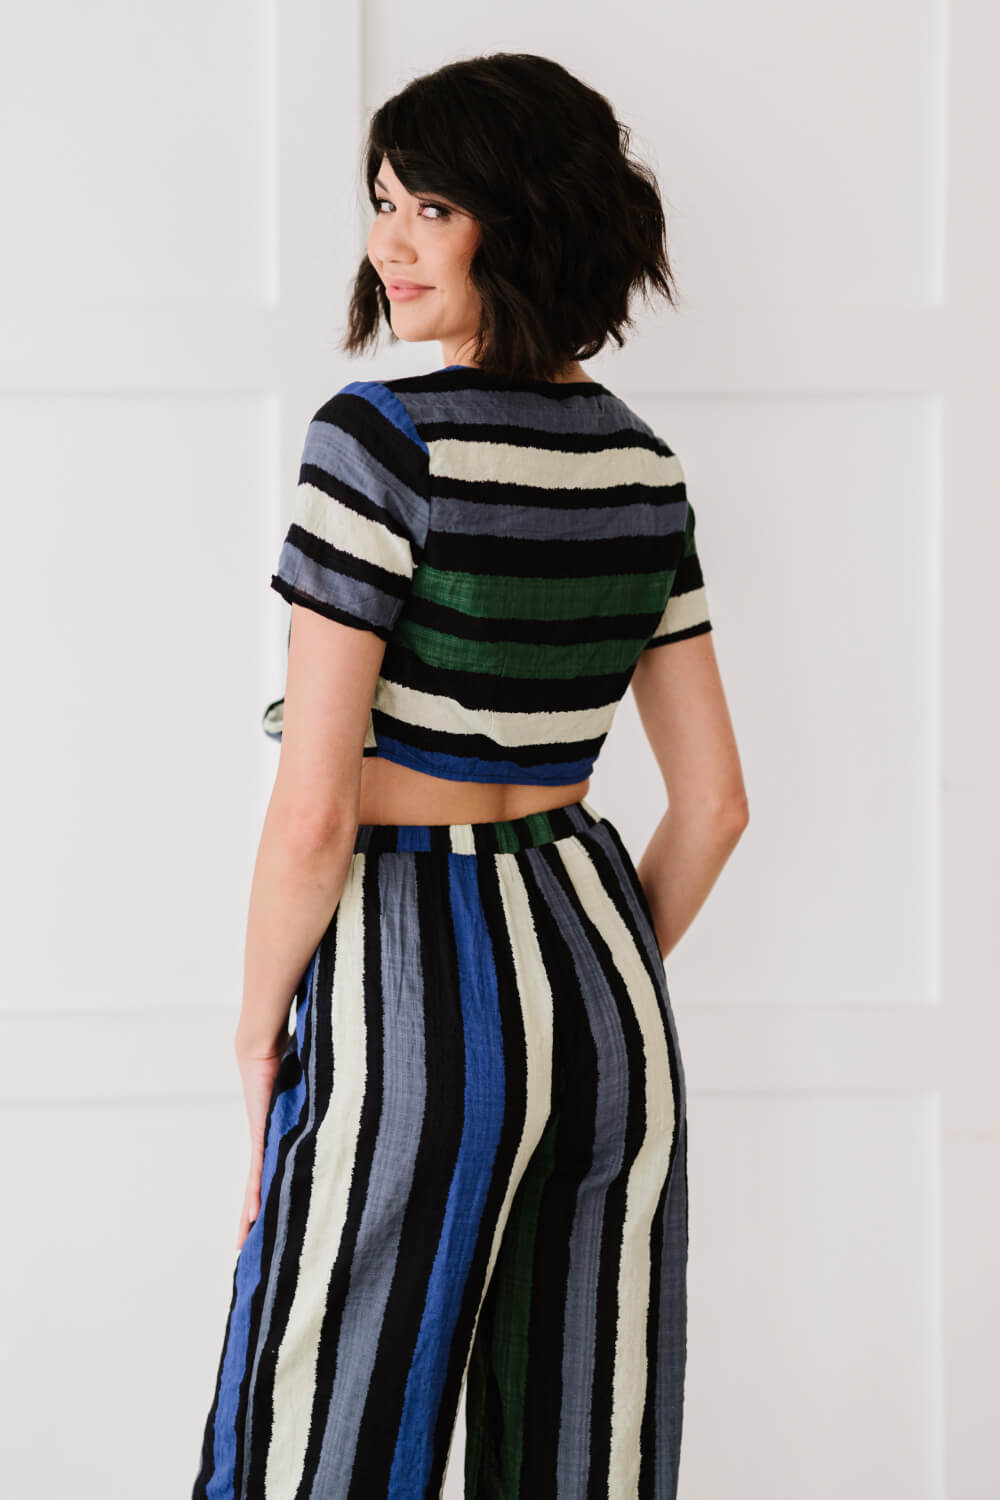 Dress Day So Divine Striped Crop Top and Pants Set - Scarvesnthangs